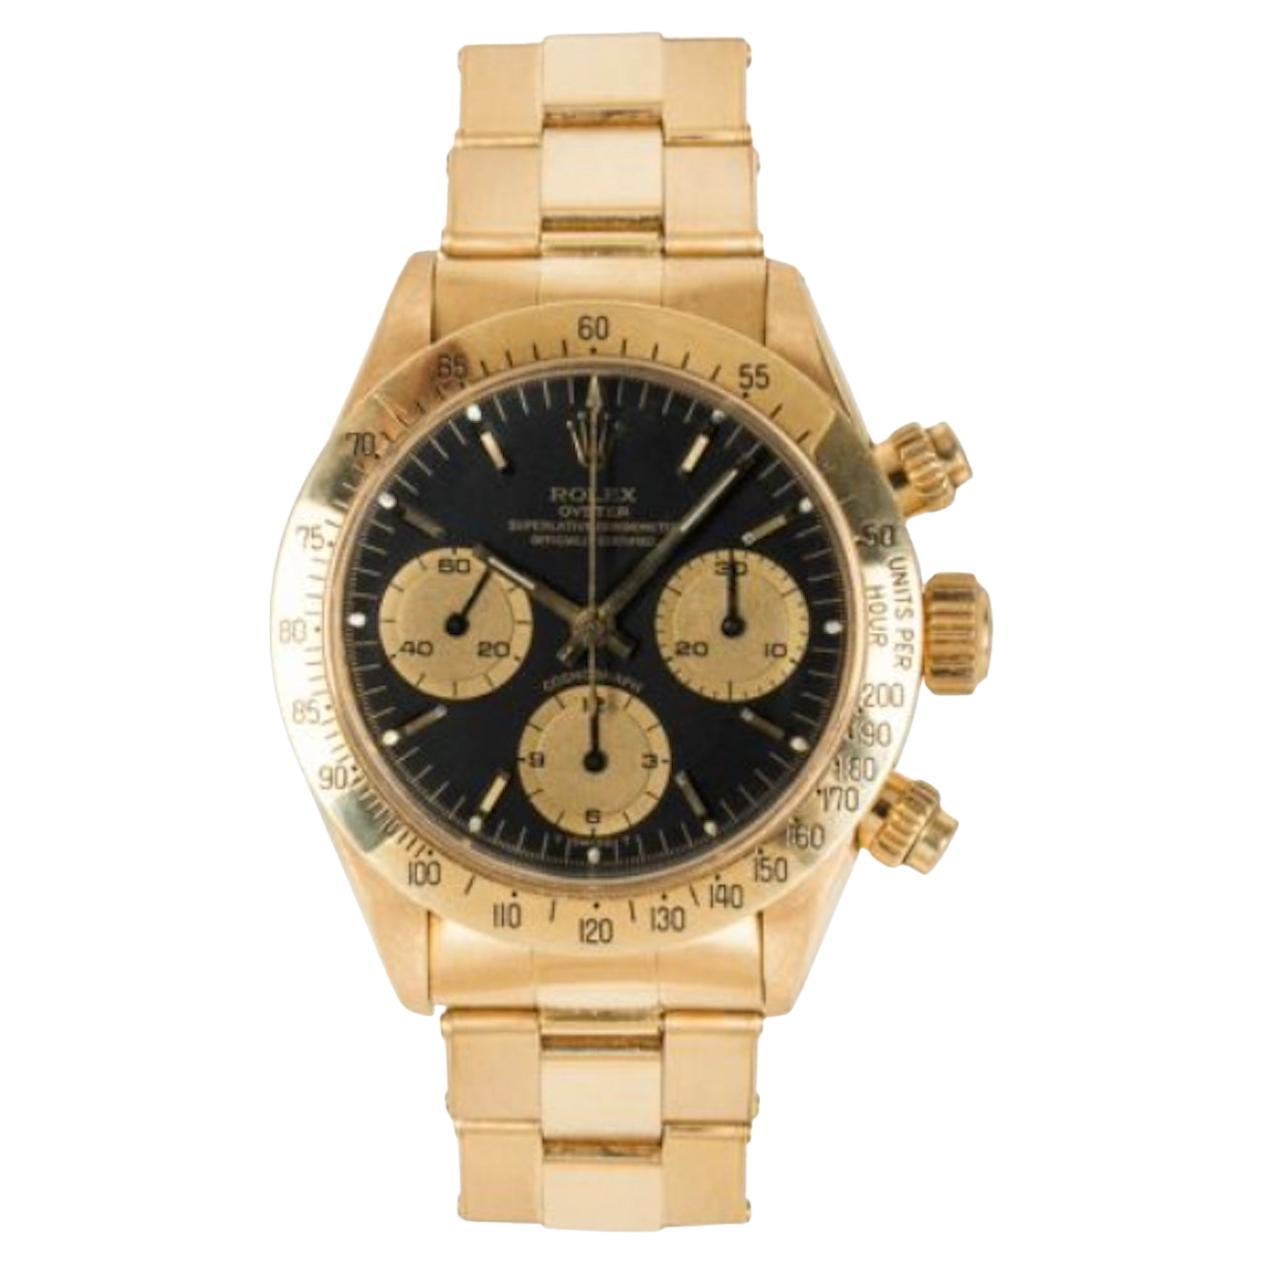 How much is a solid gold Rolex worth?